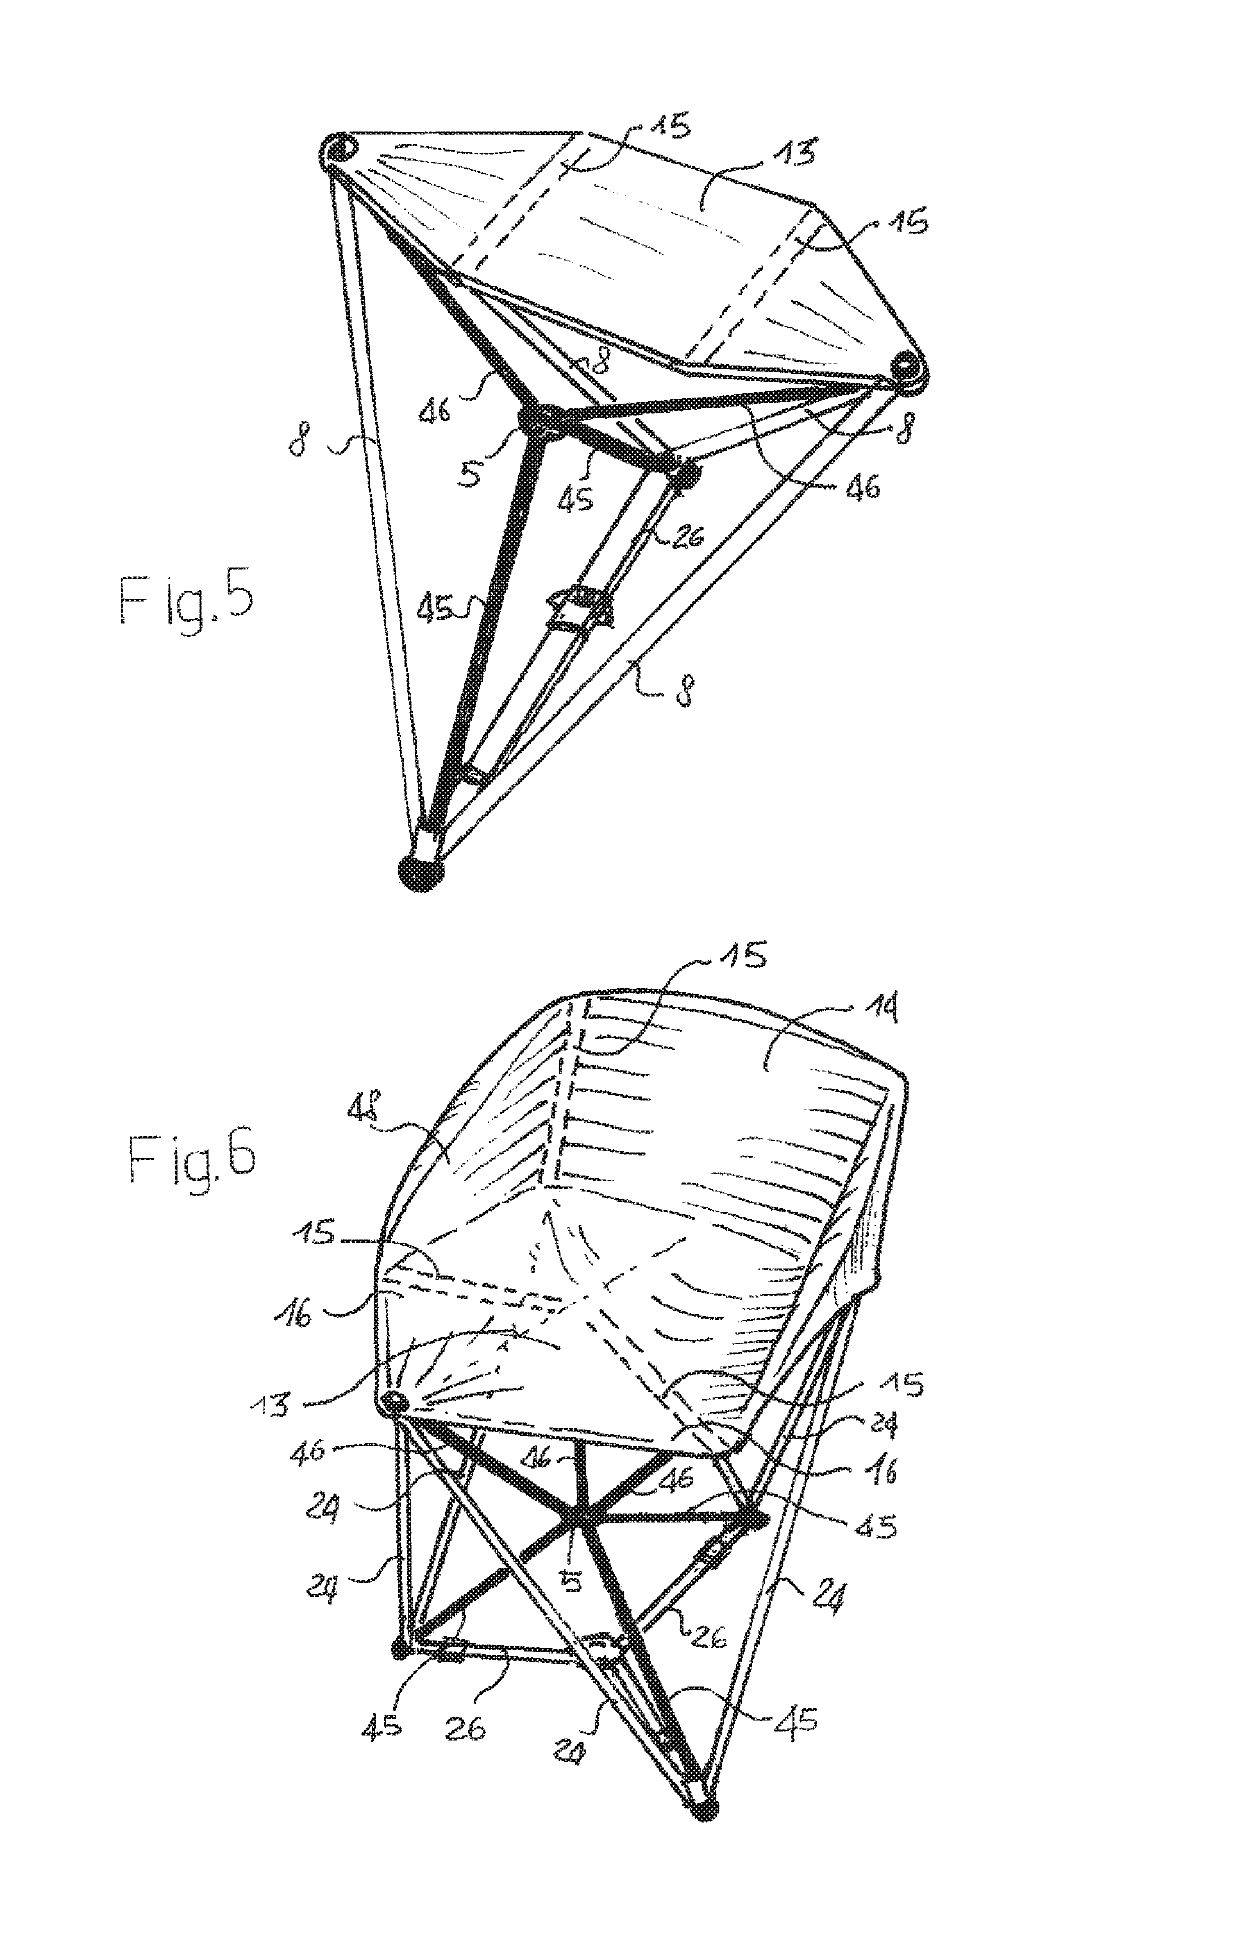 Support apparatus, such as a seat, foldable and portable